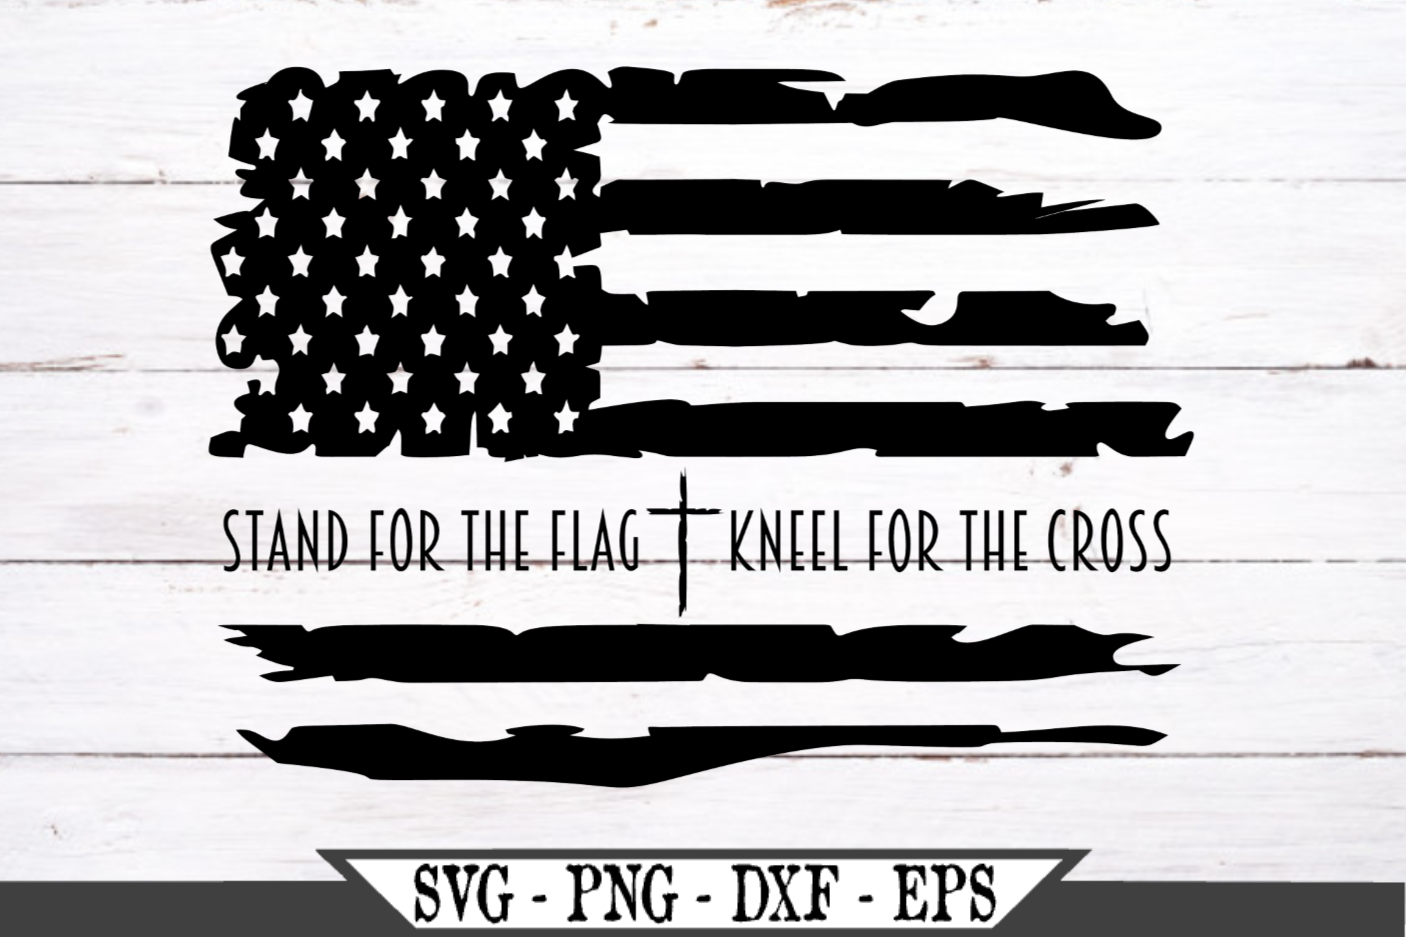 Download Stand For The Flag Kneel For The Cross Distressed Flag SVG ...